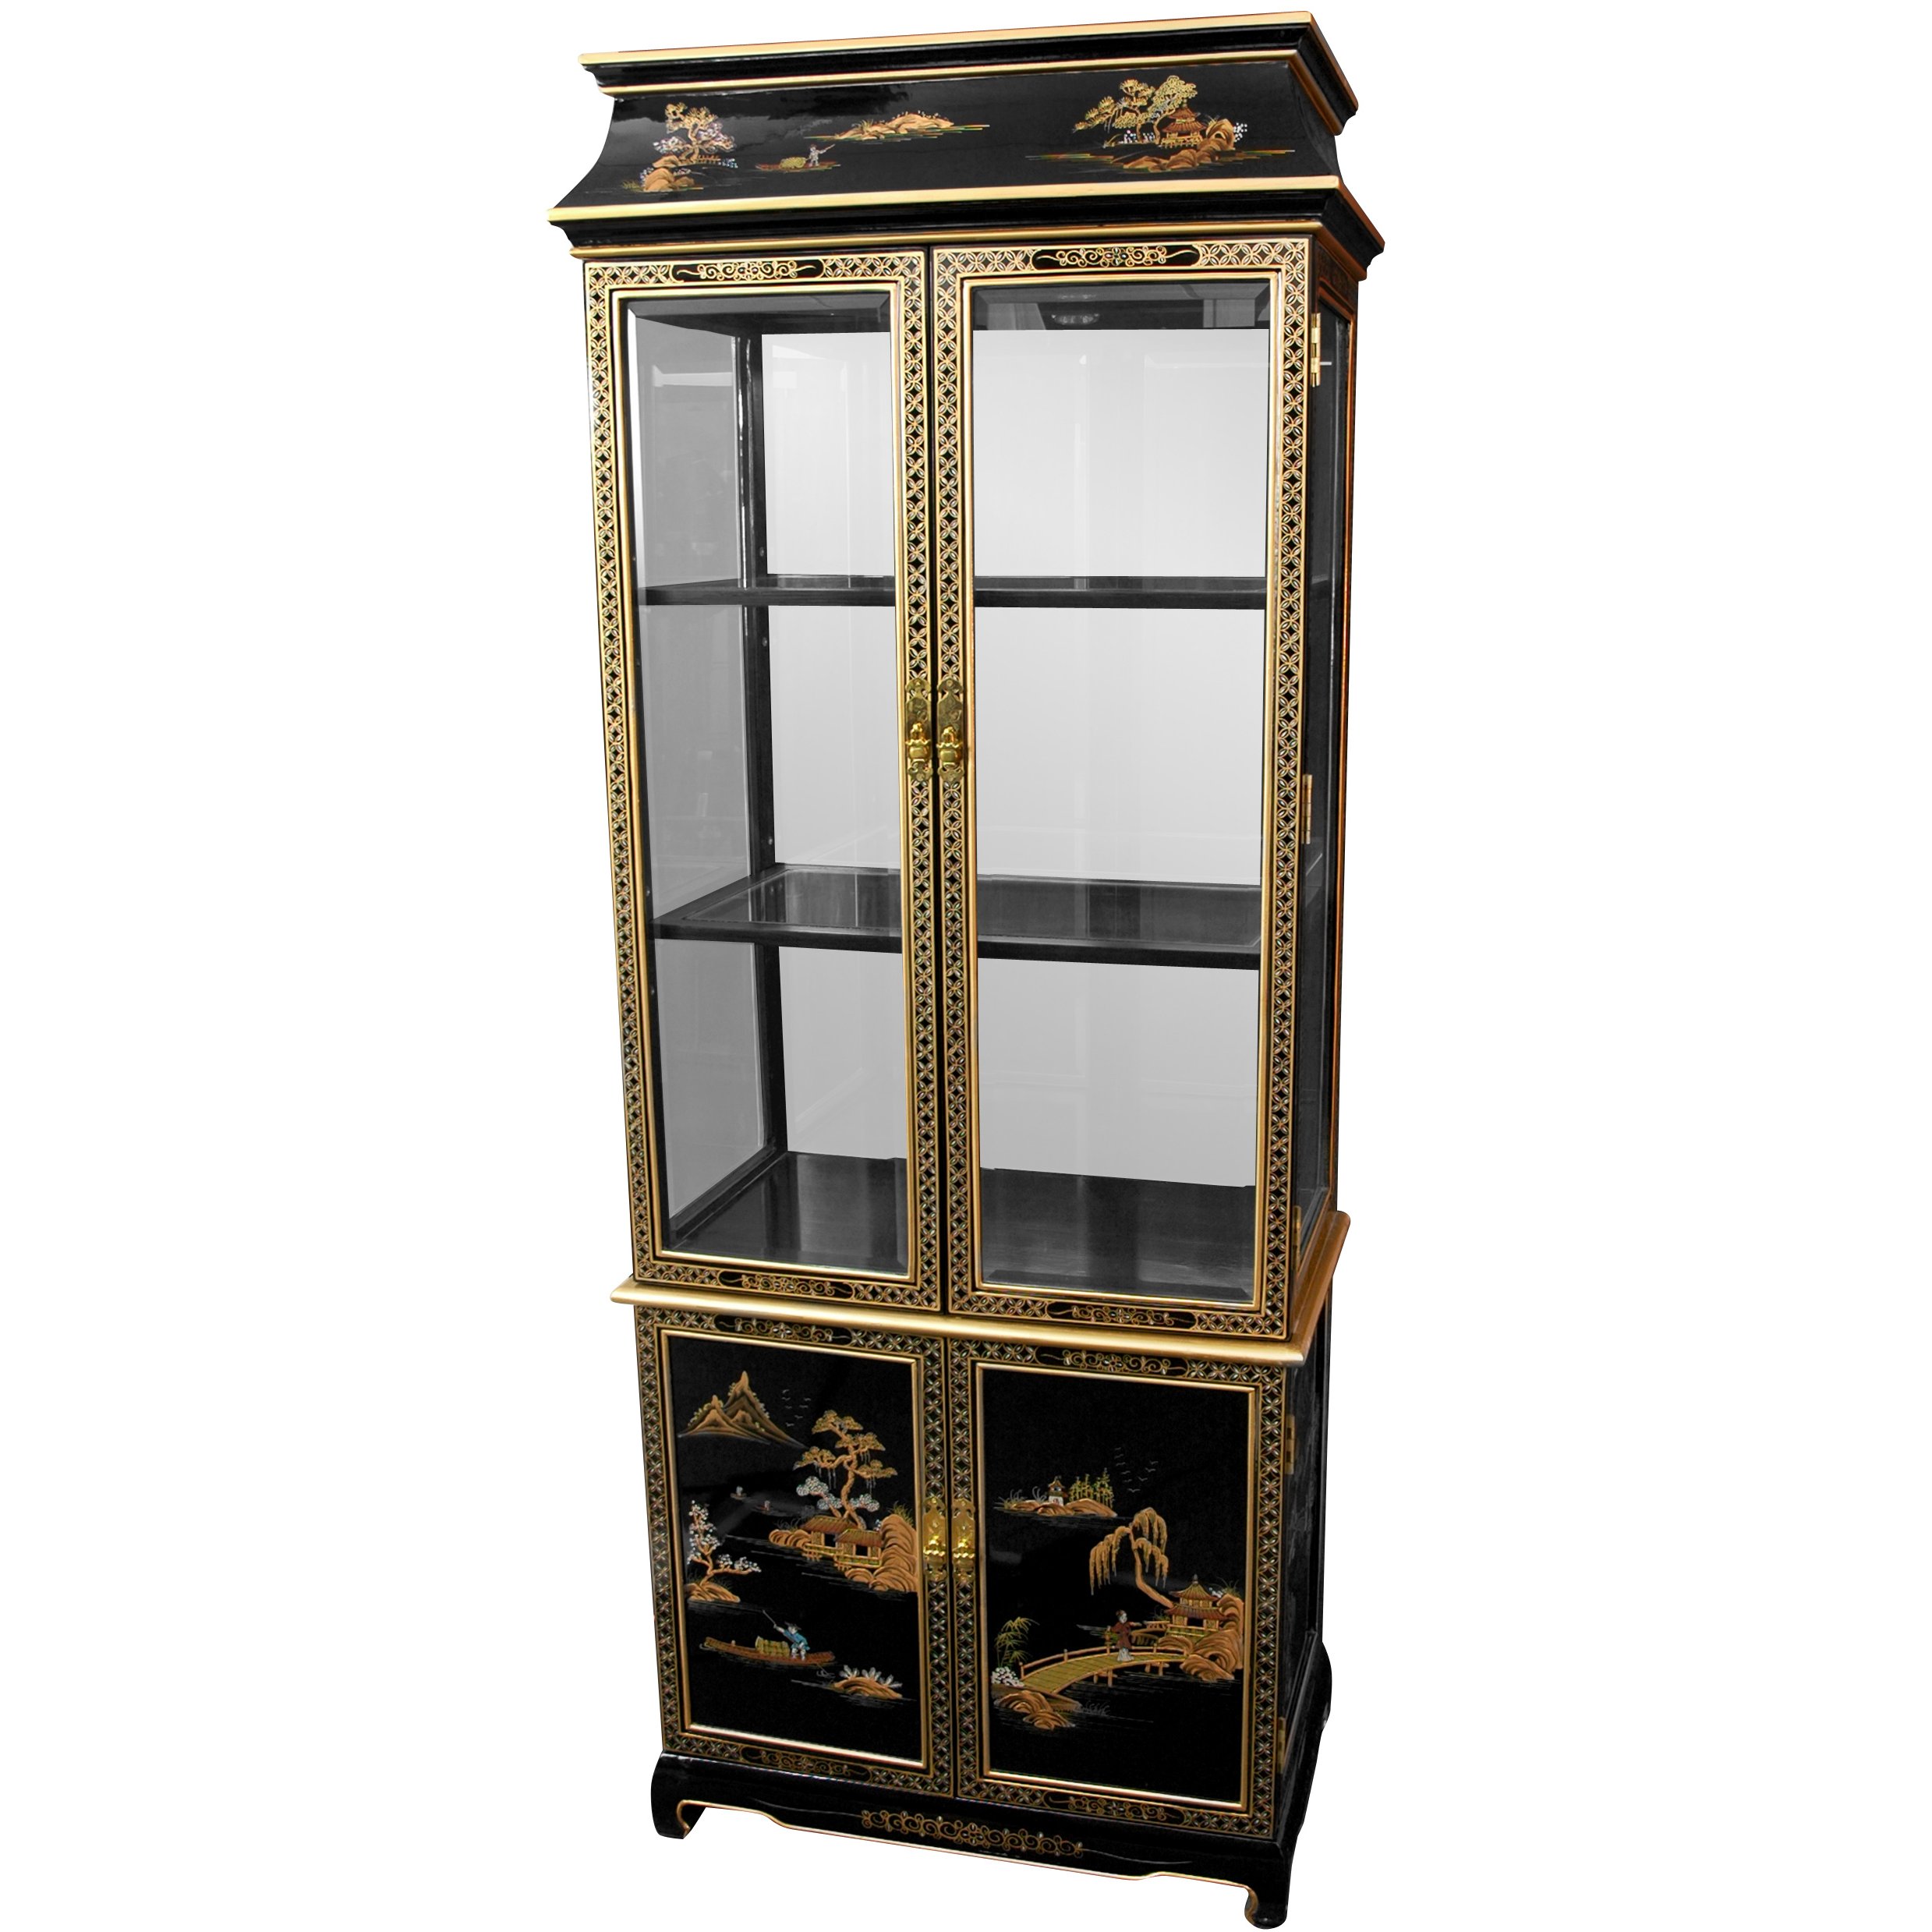 Buy Ming Pagoda Top Curio Cabinet w/ Hand Painted Oriental Landscape